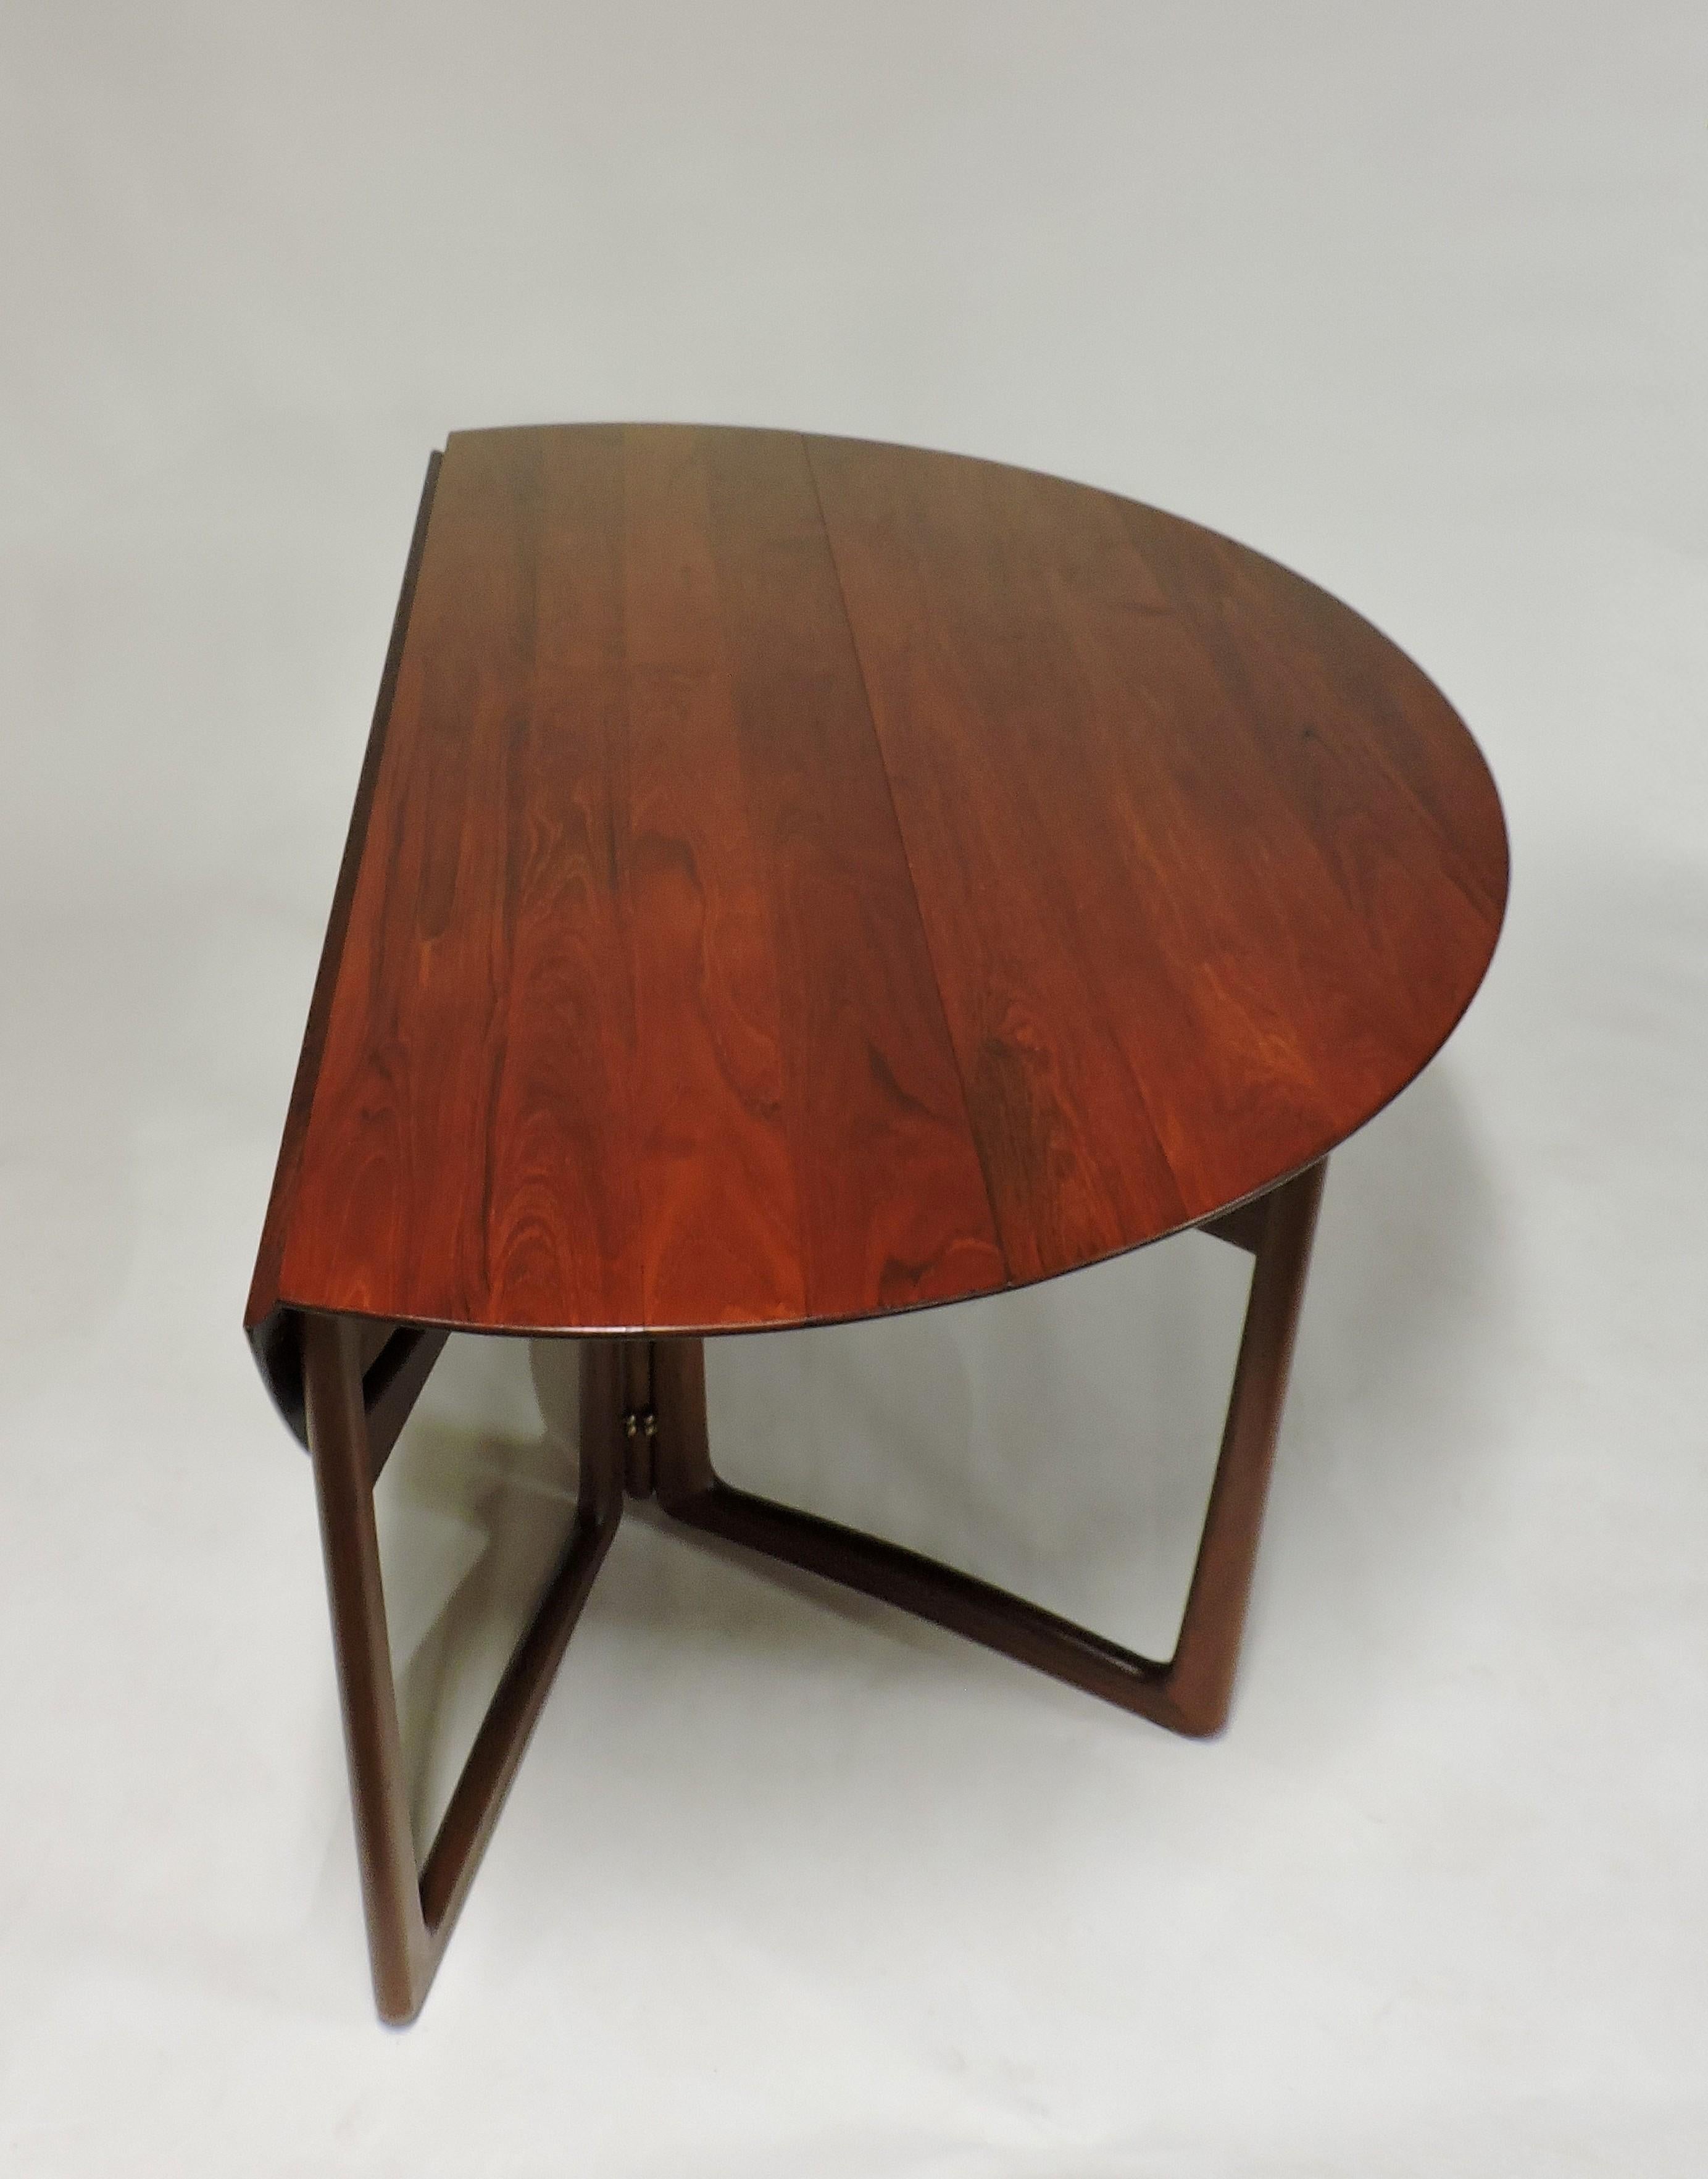 Beautiful and practical drop-leaf dining table designed by Peter Hvidt and Orla Molgaard-Nielsen. This was made in Denmark by France and Daverkosen, and sold through high-end retailer, John Stuart. The solid teak has a deep, rich color and a lively